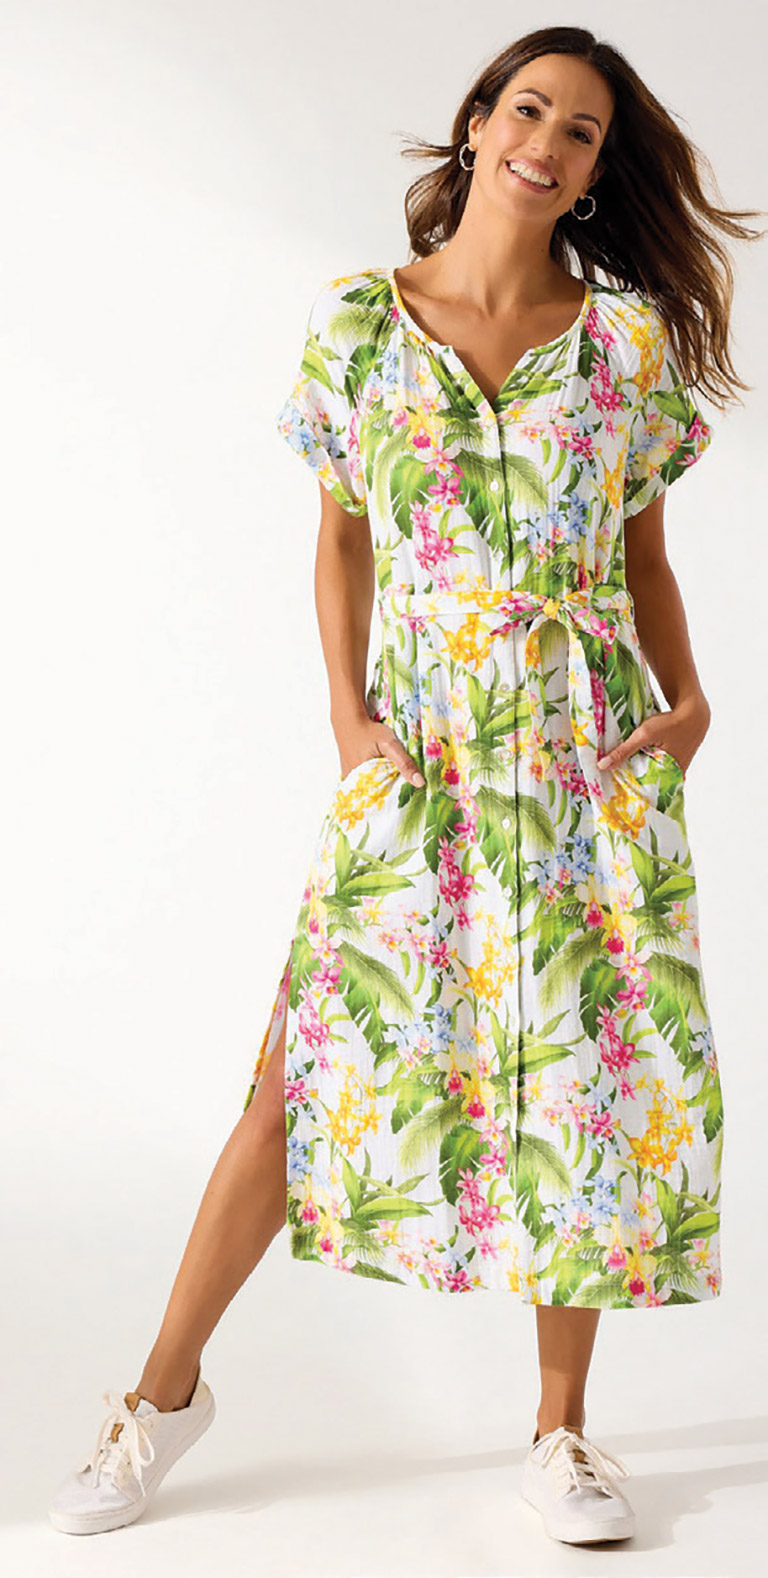 woman in spring floral dress